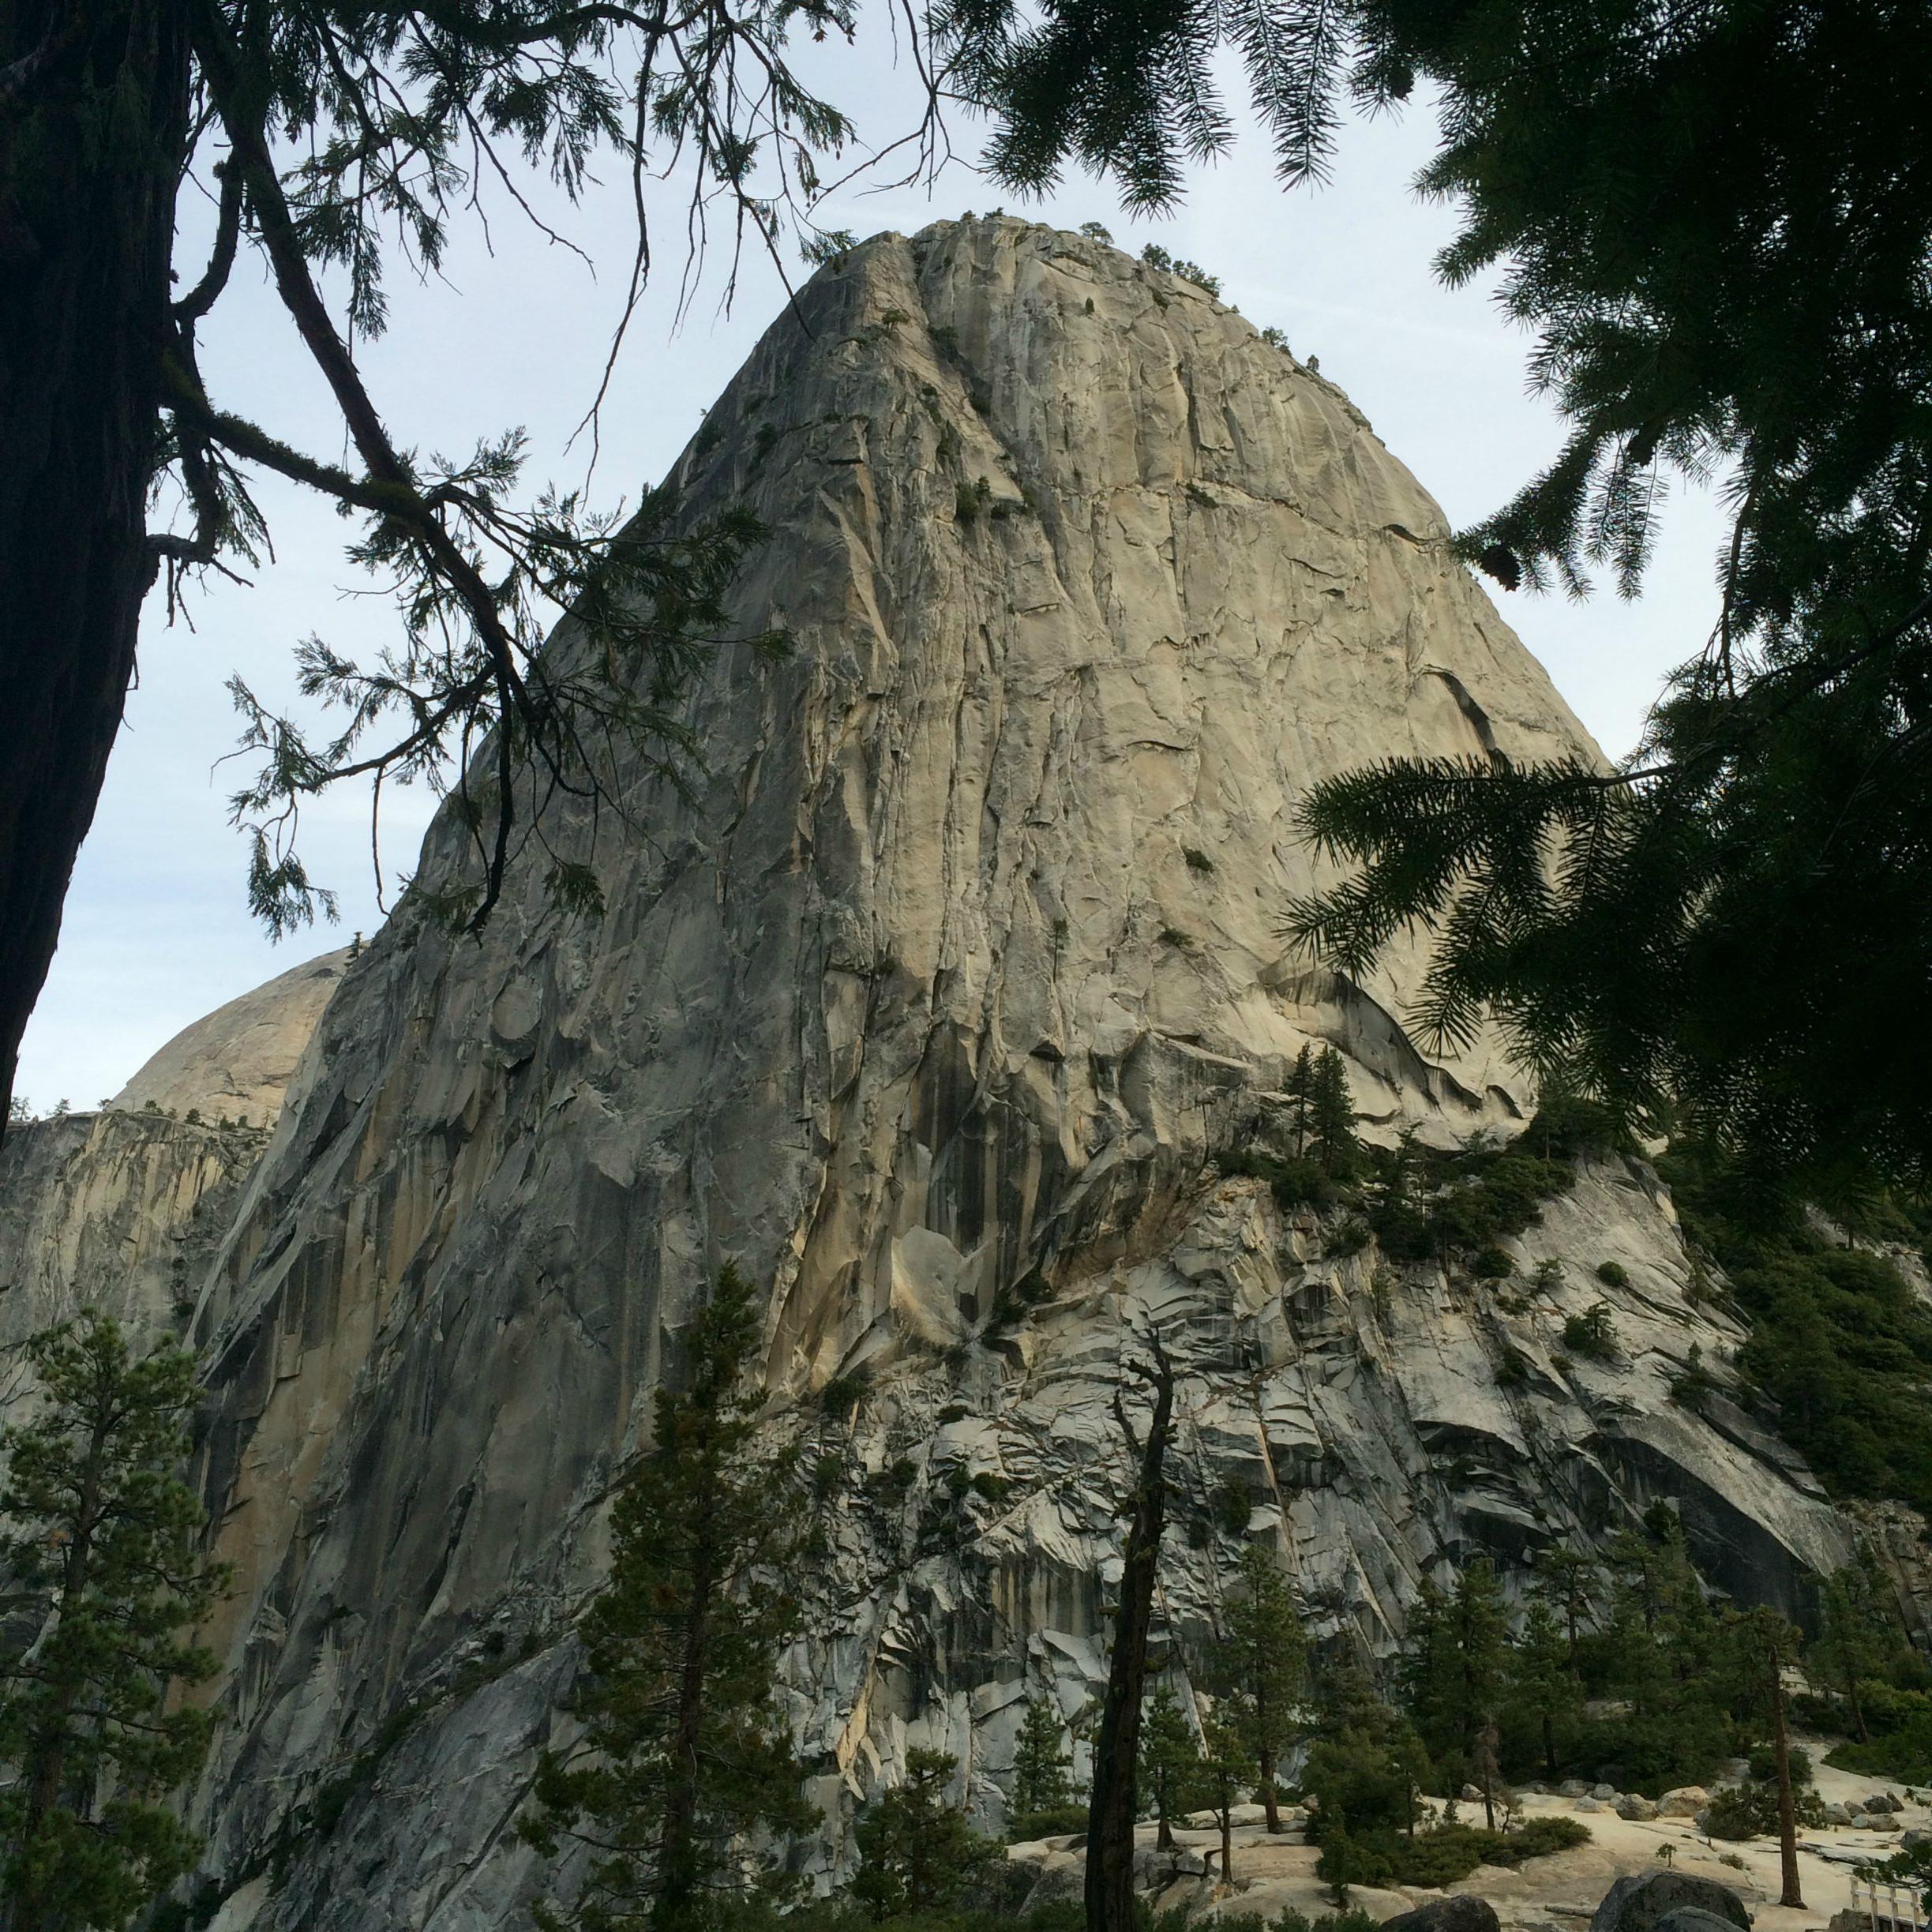 This Guy Chose Yosemite Instead of Going to Vegas with his Friends